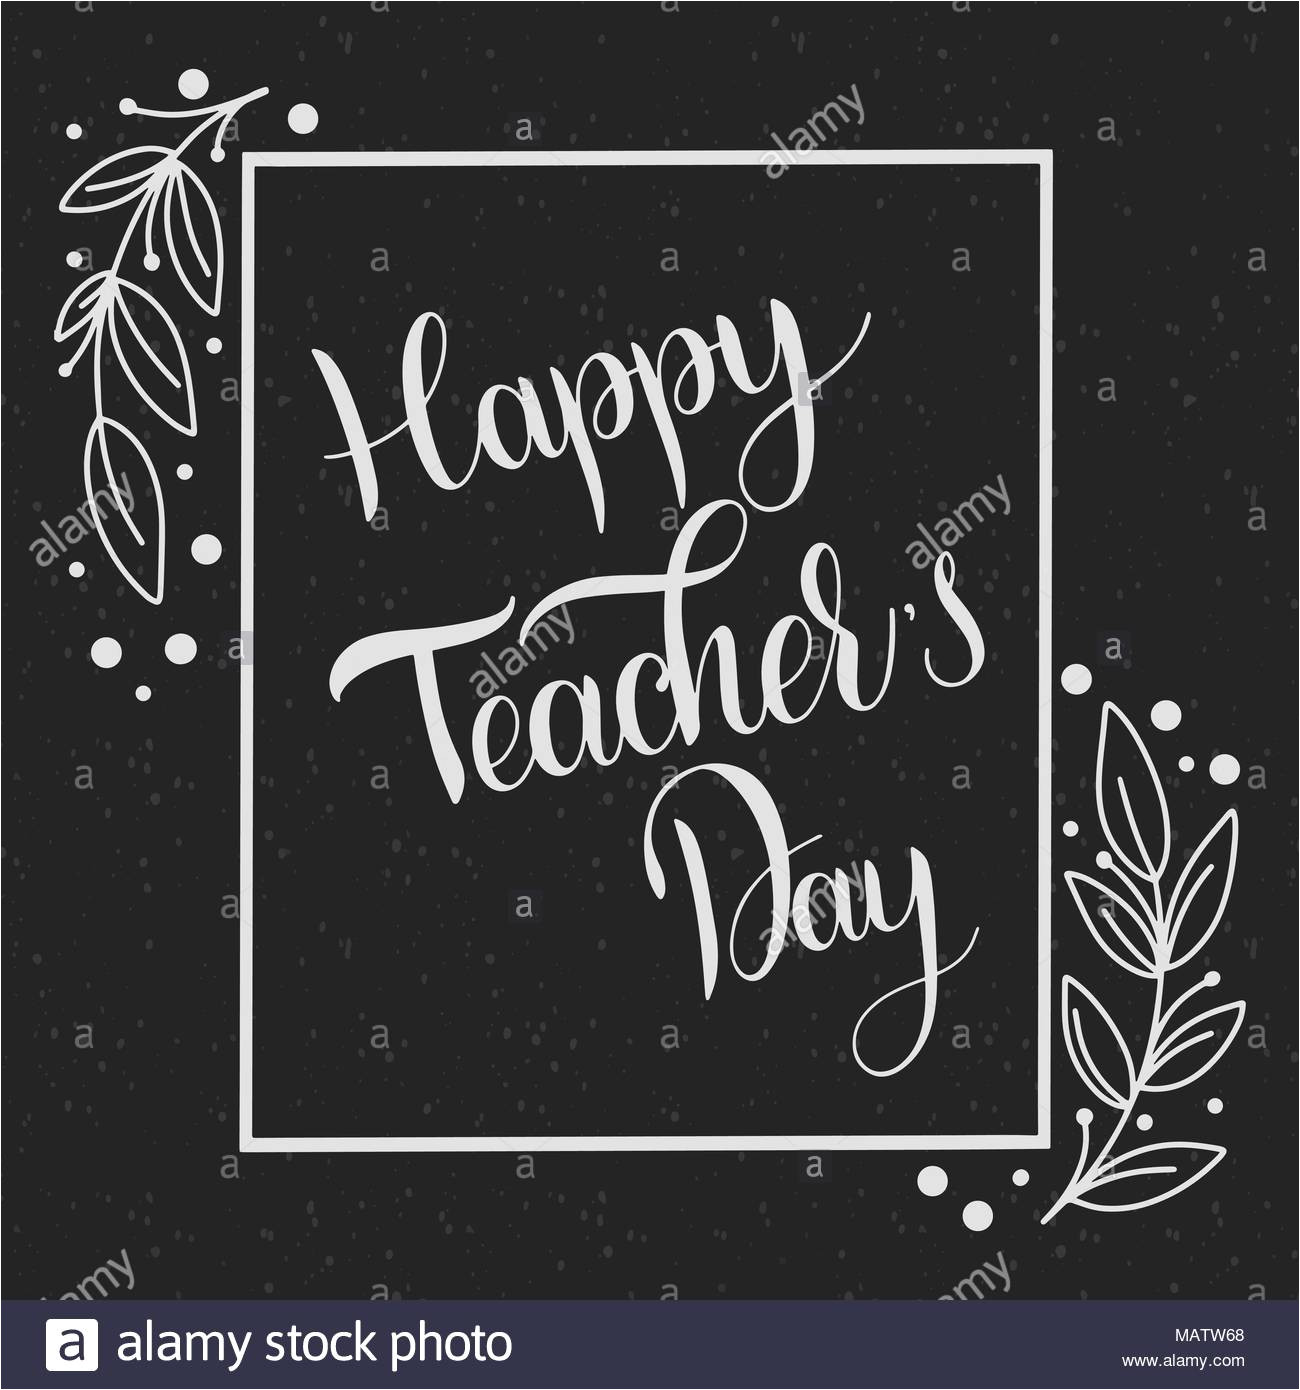 happy teacher day lettering elements for invitations posters greeting cards seasons greetings matw68 jpg